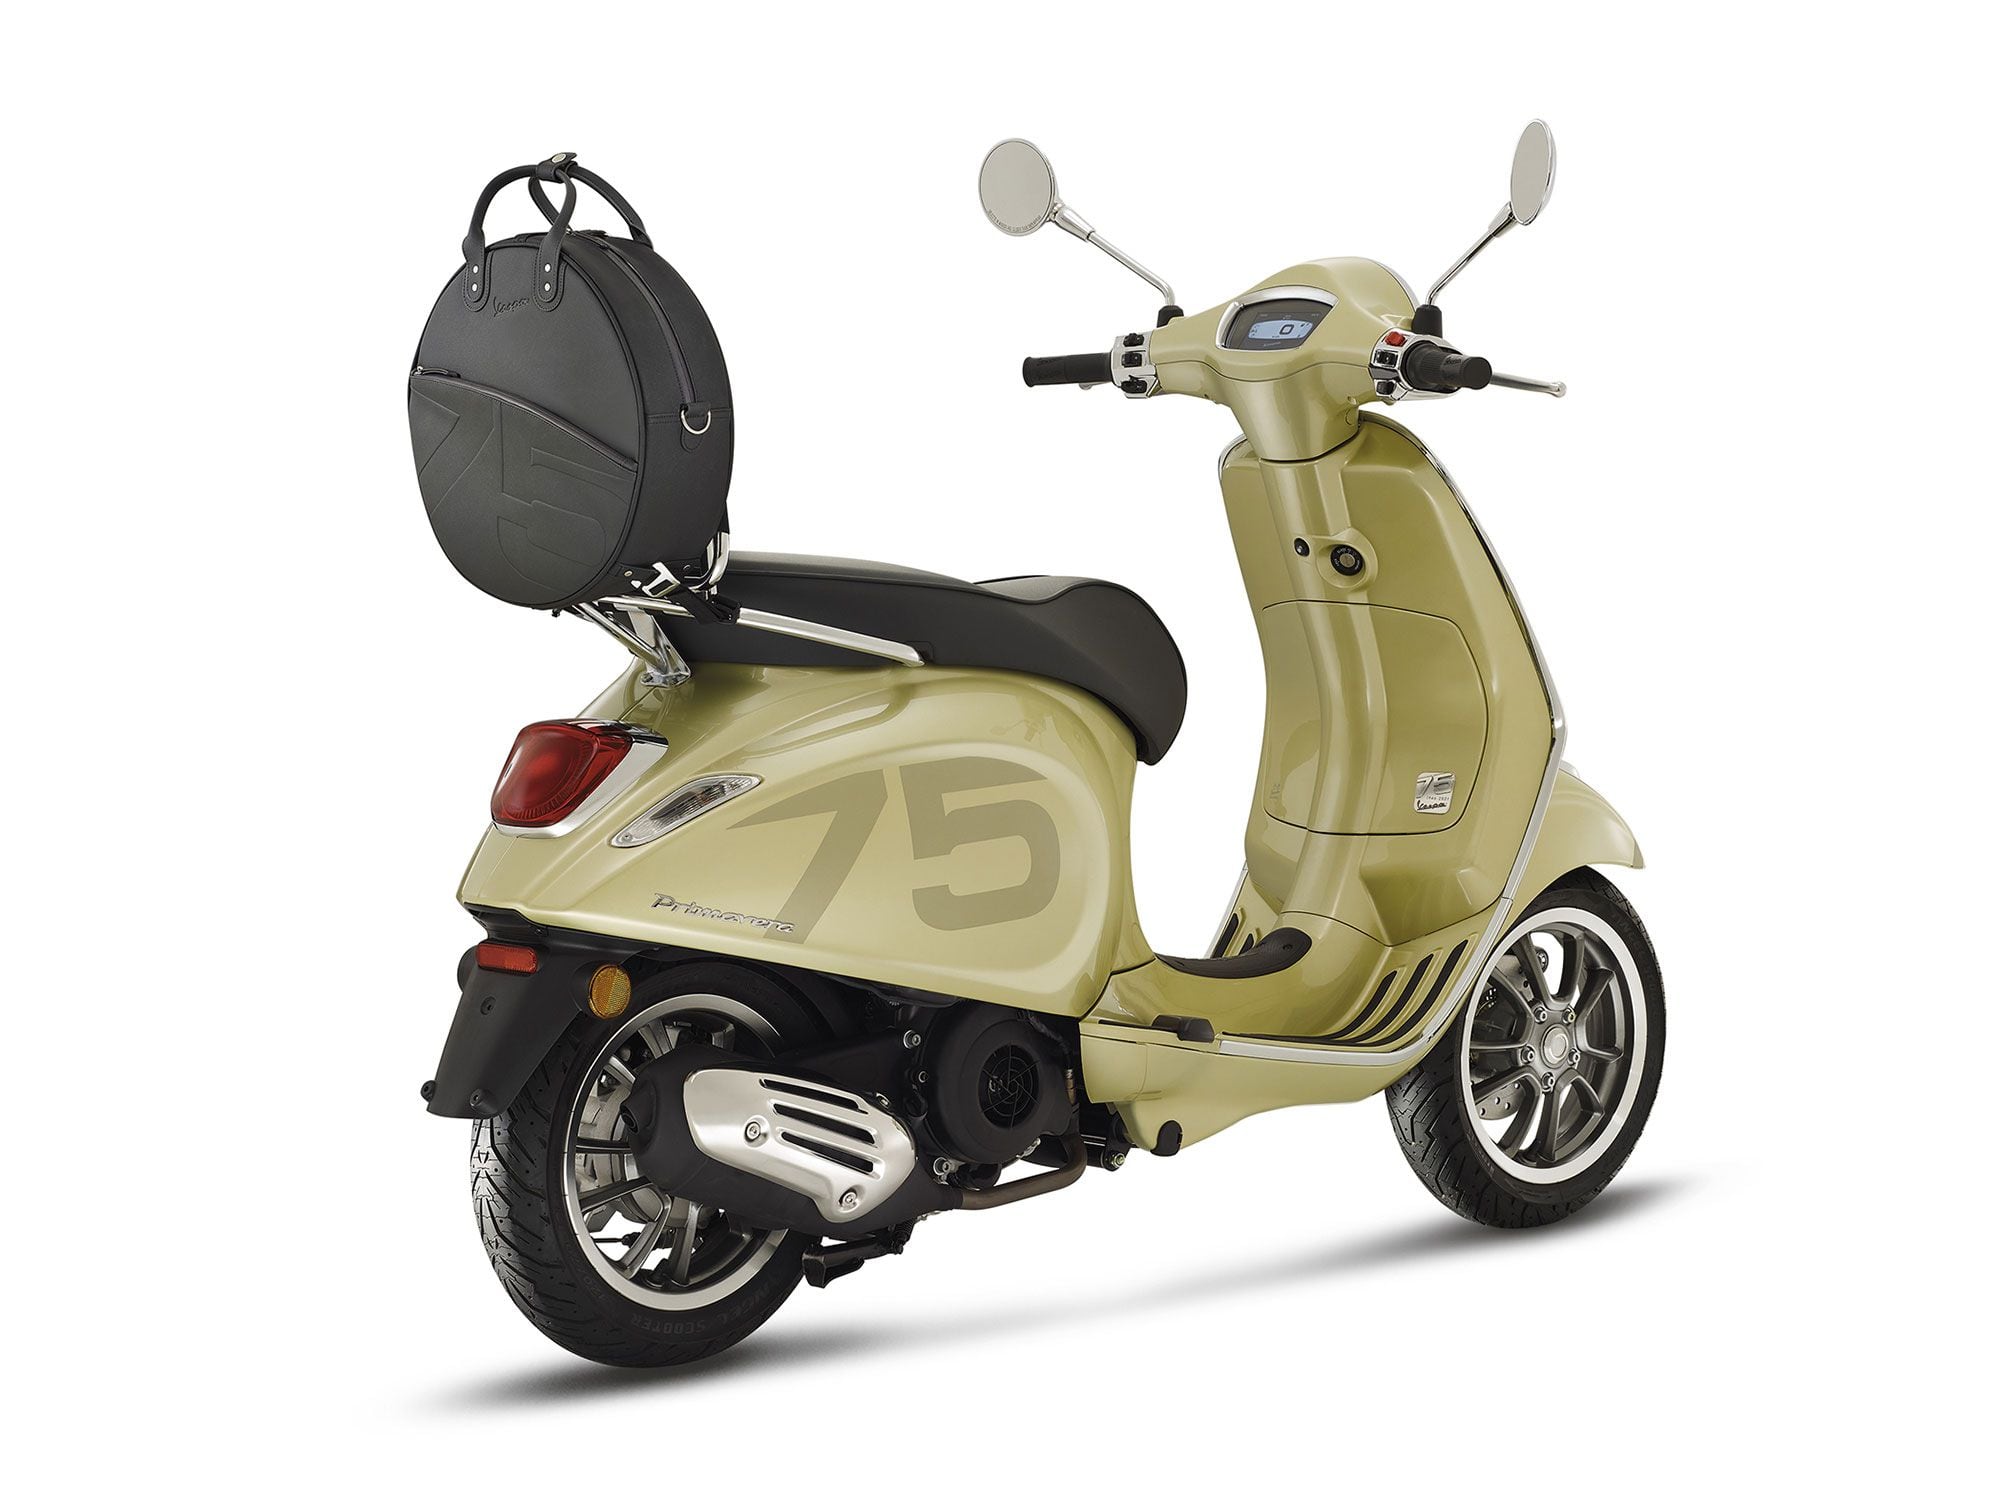 A spare-tire-shaped leather bag is included with the 75th Anniversary Edition Vespa models.